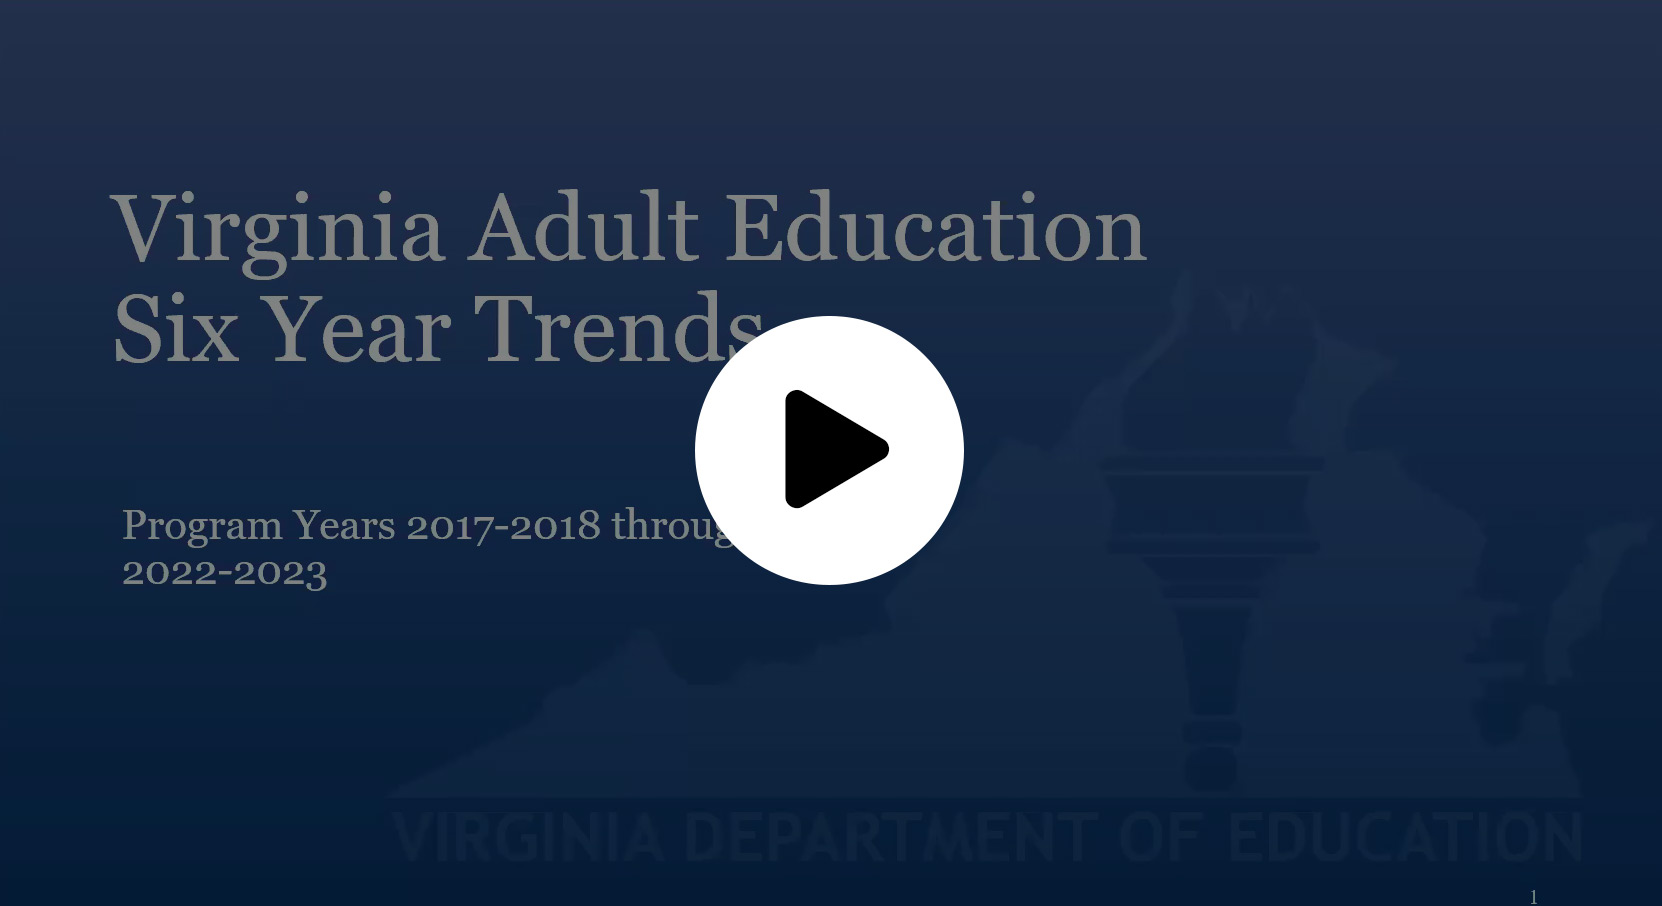 Virginia Adult Education 6 Year Trends